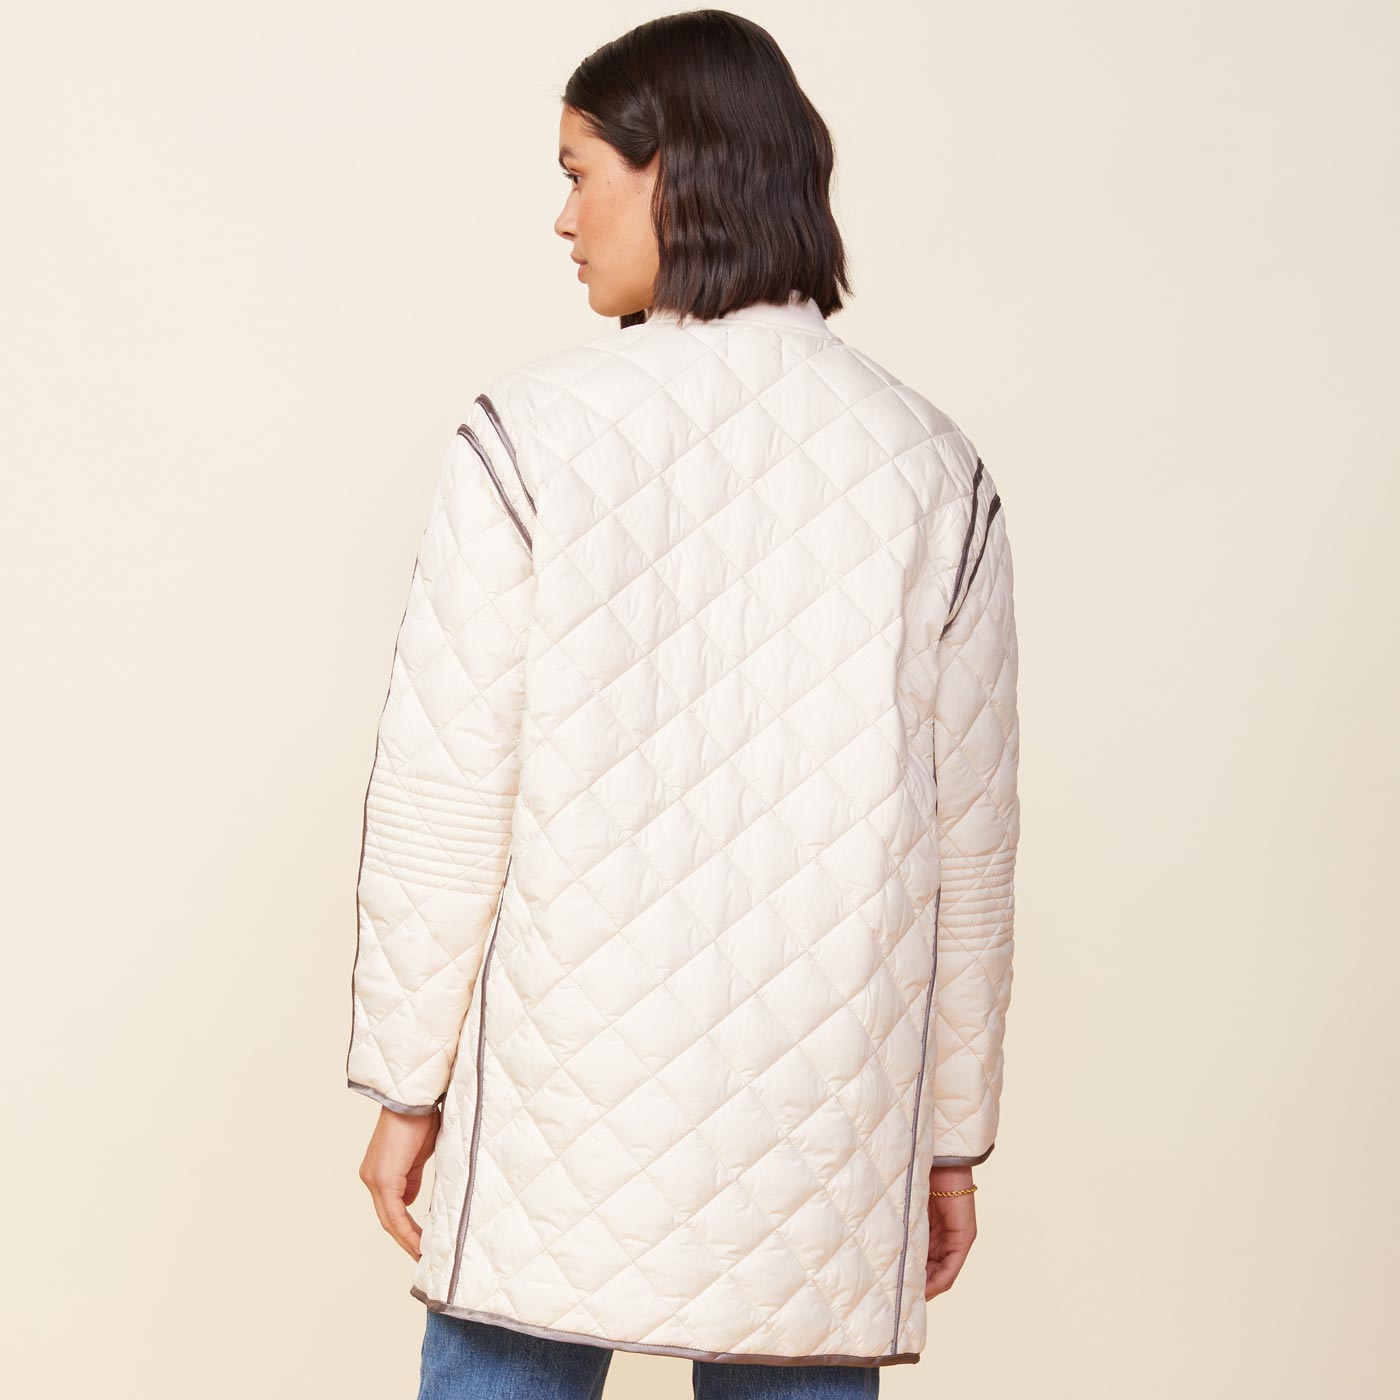 Back view of model wearing the quilted bomber in off white.